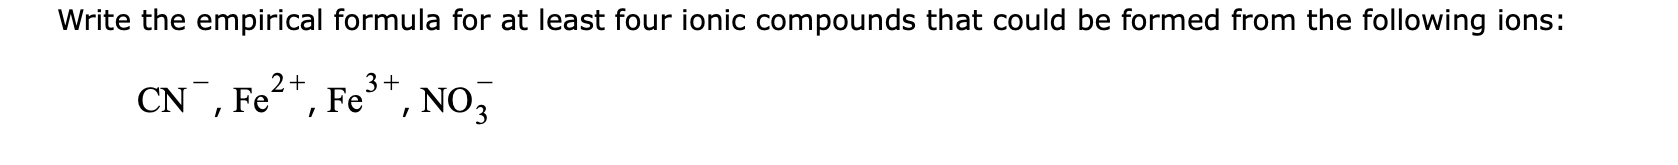 Write the empirical formula for at least four ionic compounds that could be formed from the following ions:
CN¯, Fe²*, Fe³*, NO,
